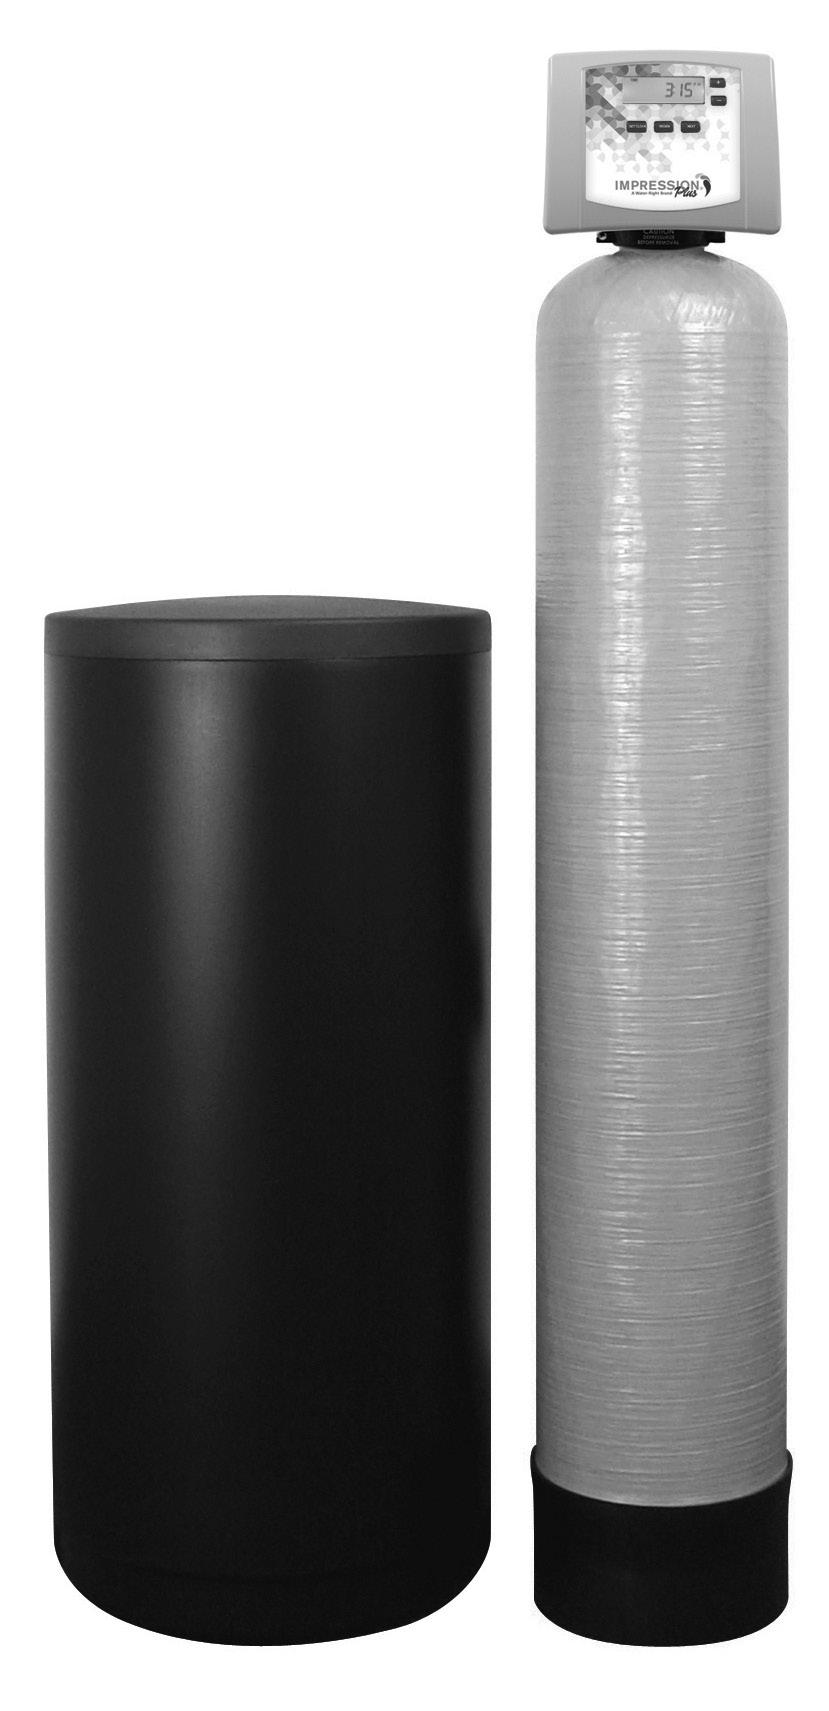 Impression Plus Series Metered Water Softeners For Certified Models: IMP-844 IMP-948